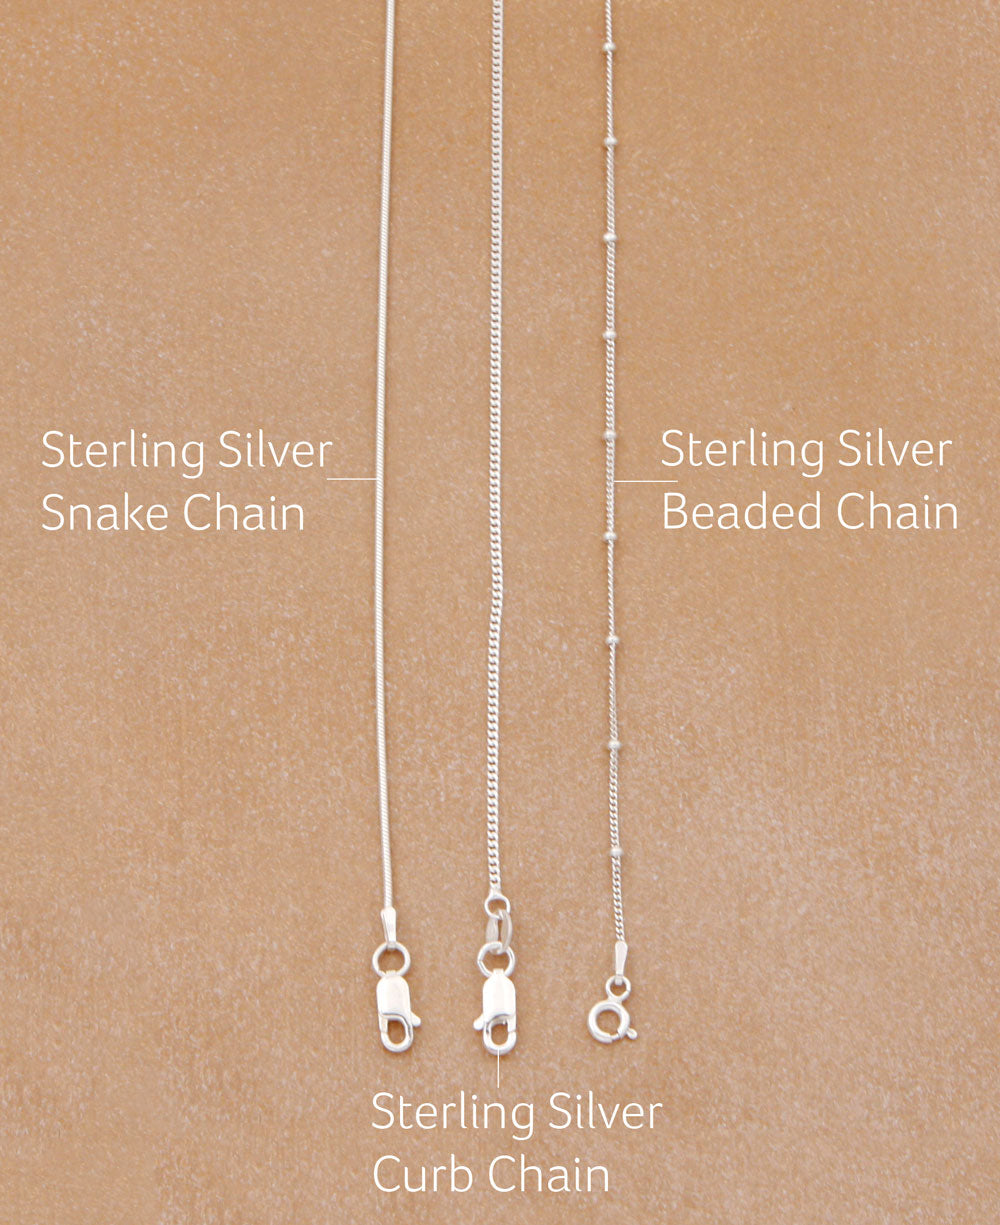 Chains, Made in Italy, Stelring Silver